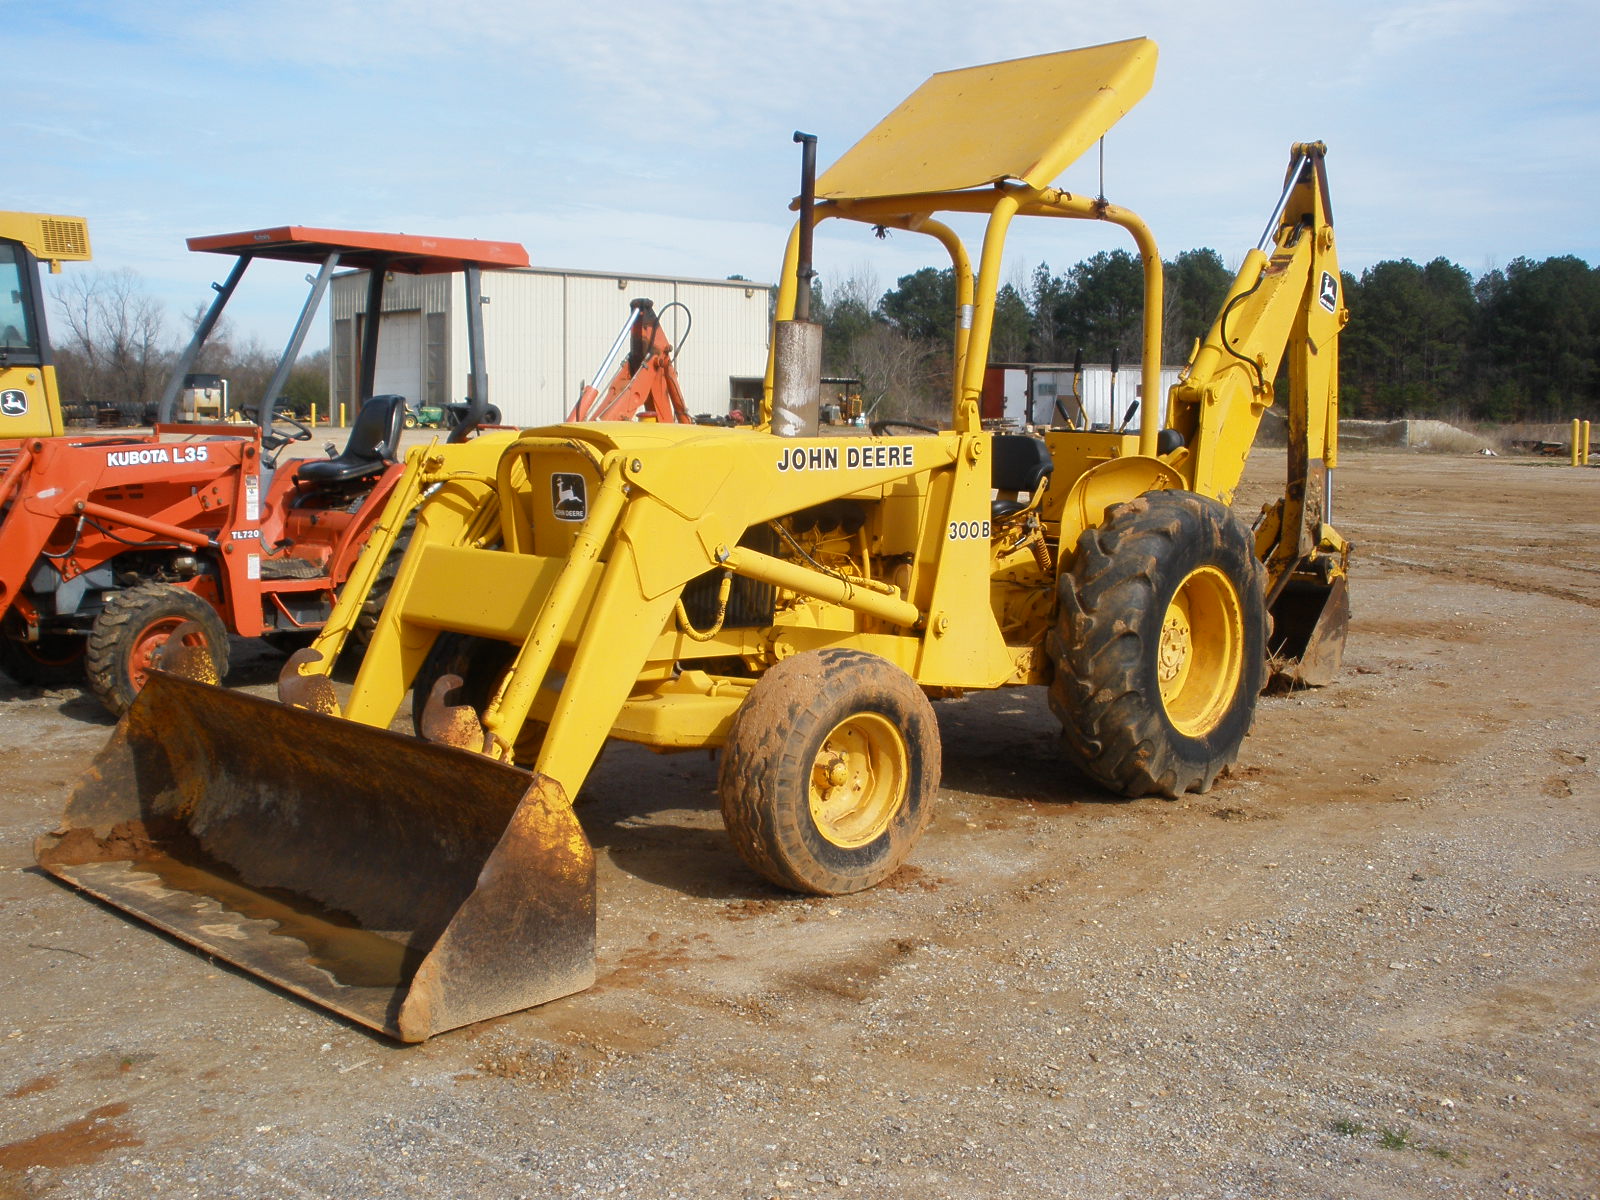 John Deere 300B Backhoe Specifications submited images.